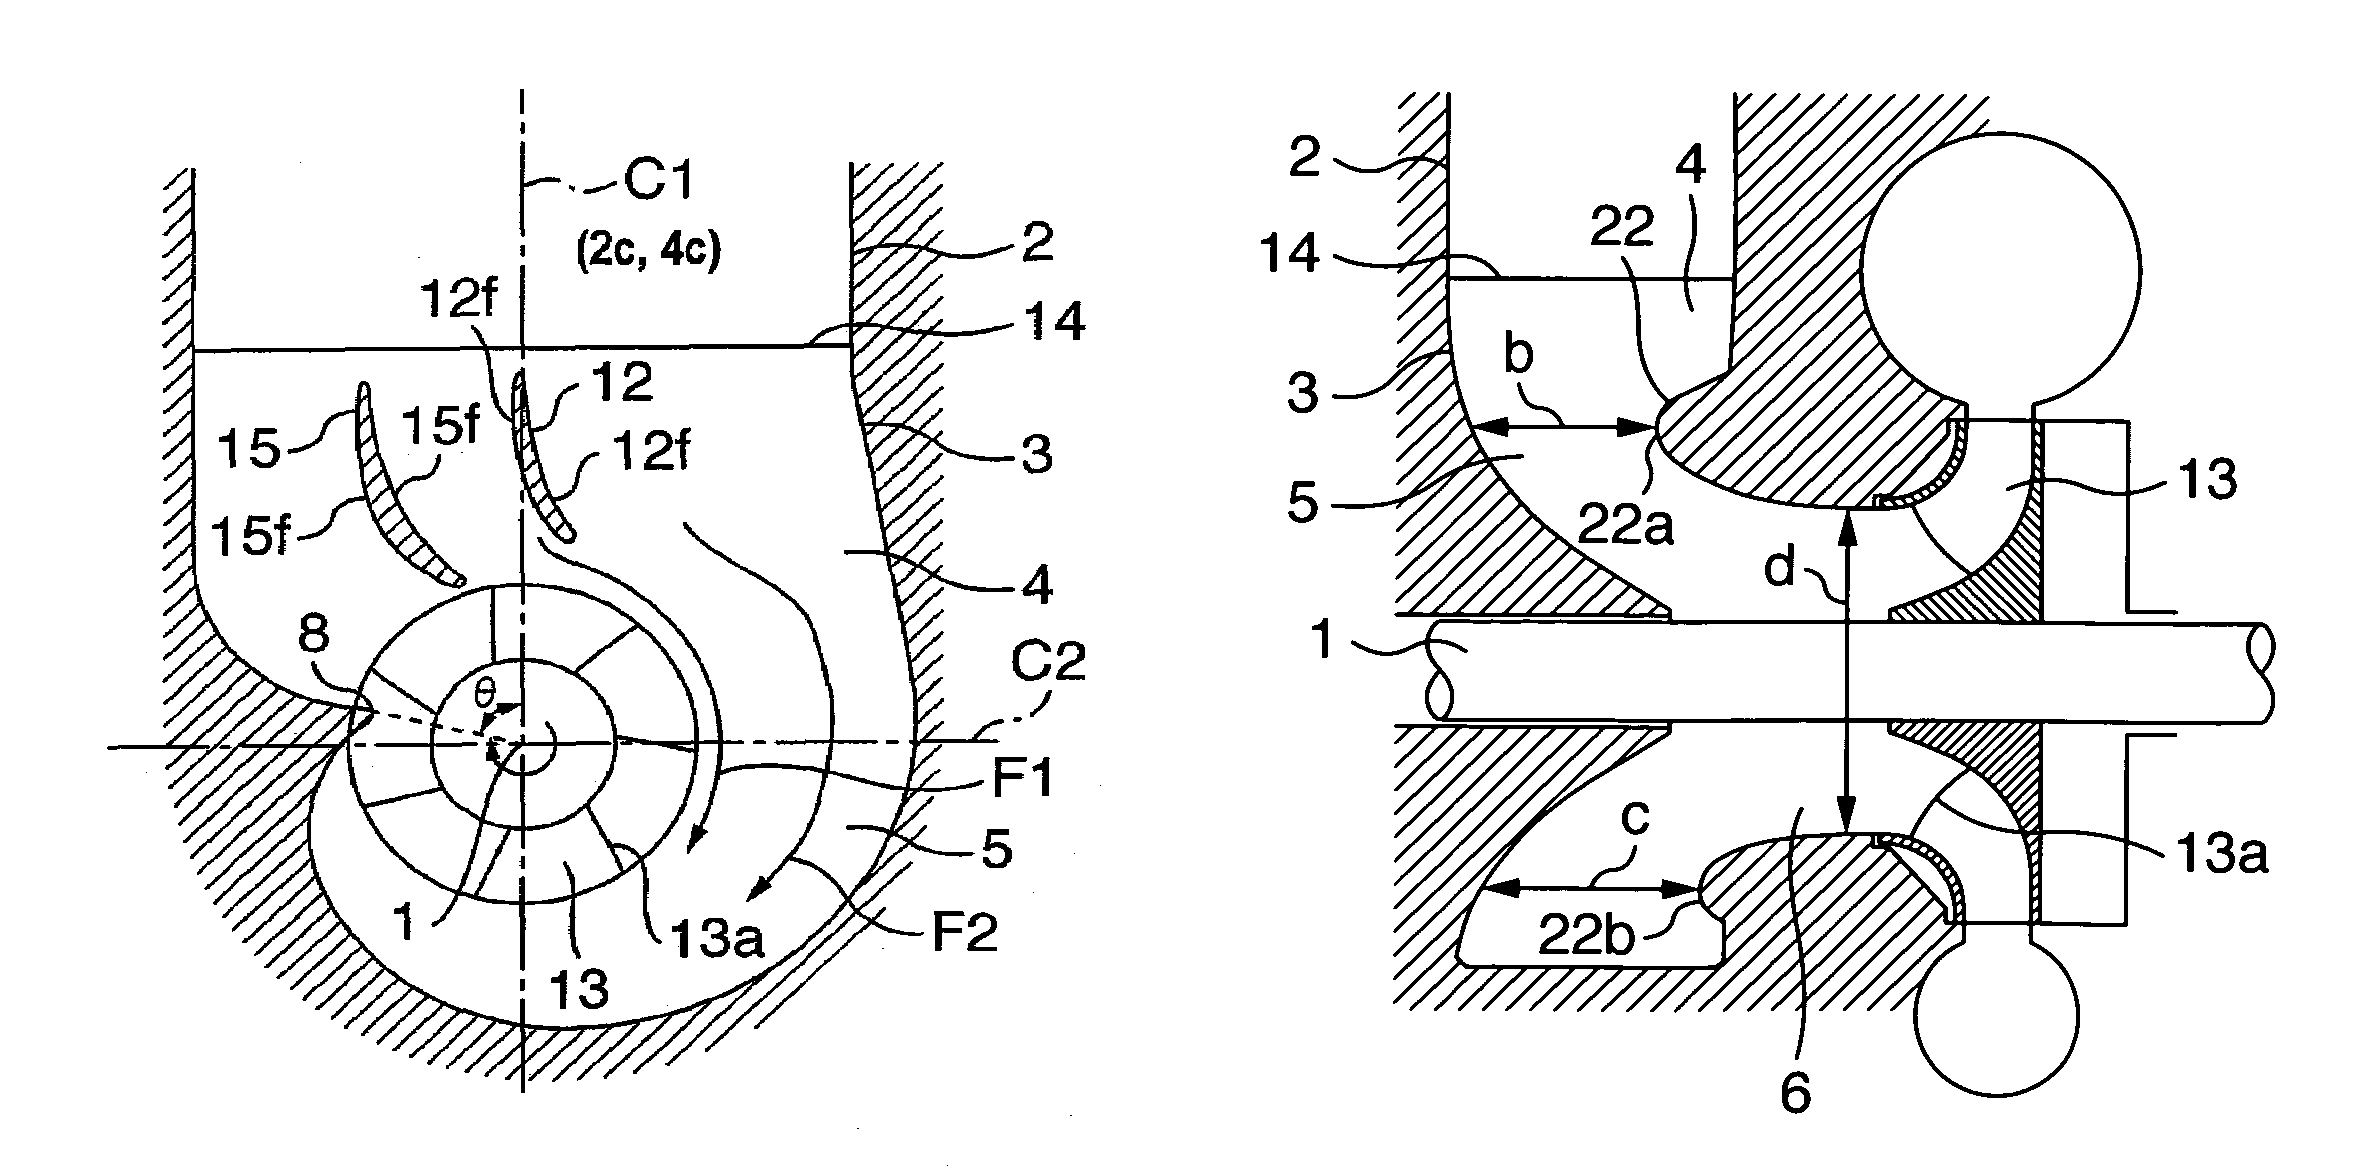 Inlet casing and suction passage structure